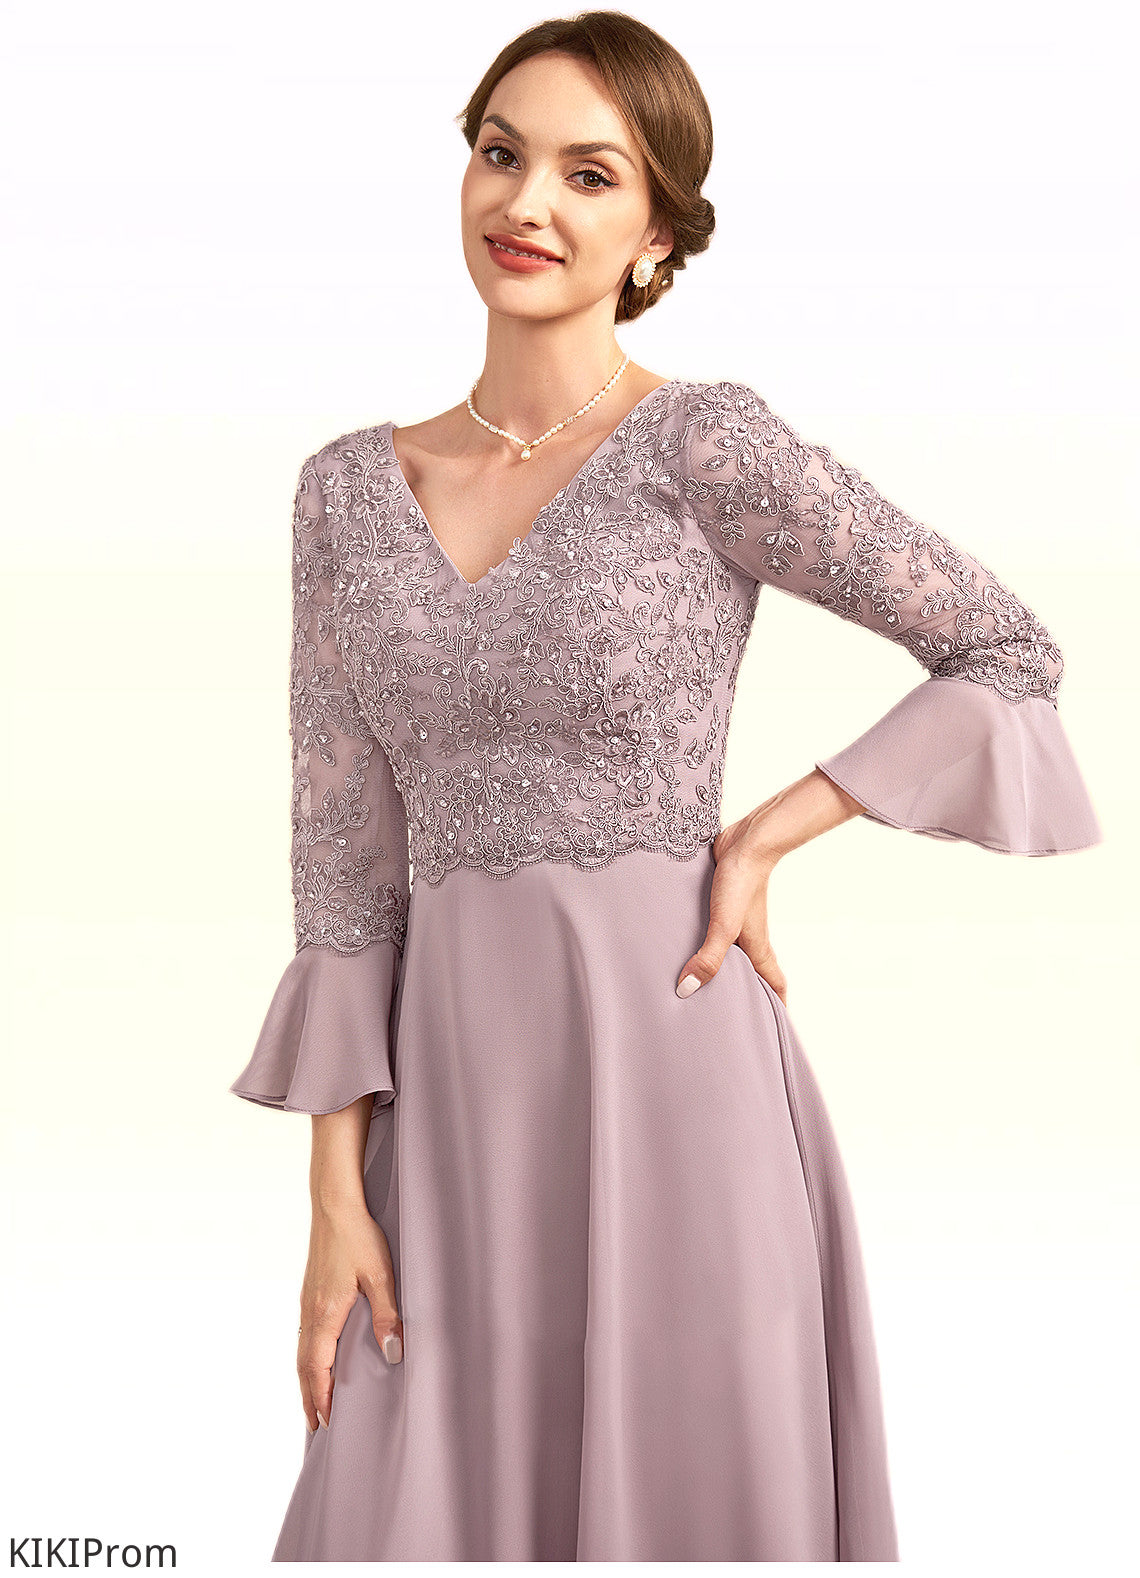 Cadence A-Line V-neck Knee-Length Chiffon Lace Mother of the Bride Dress With Sequins Cascading Ruffles DZ126P0014977